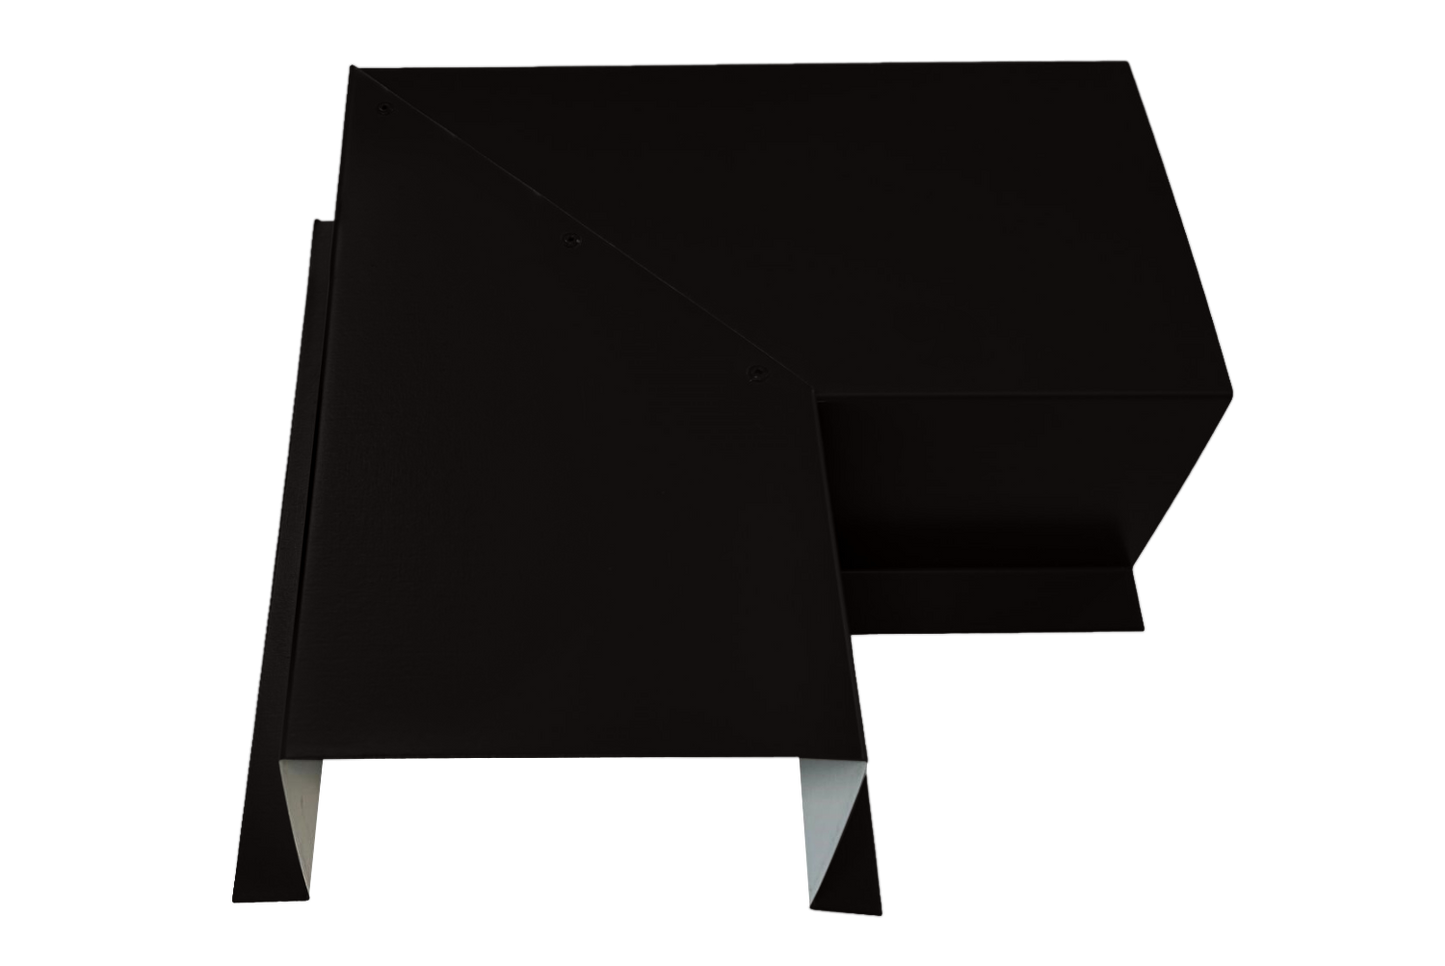 A black, geometric, and abstract modern art sculpture featuring sharp angles and folded sections crafted from Premium Quality 24 Gauge Line Set Cover Side Turning Elbows of the Commercial Series by Perma Cover. This intricate three-dimensional form casts shadows, adding depth and contrast to its appearance while ensuring durability for years to come.